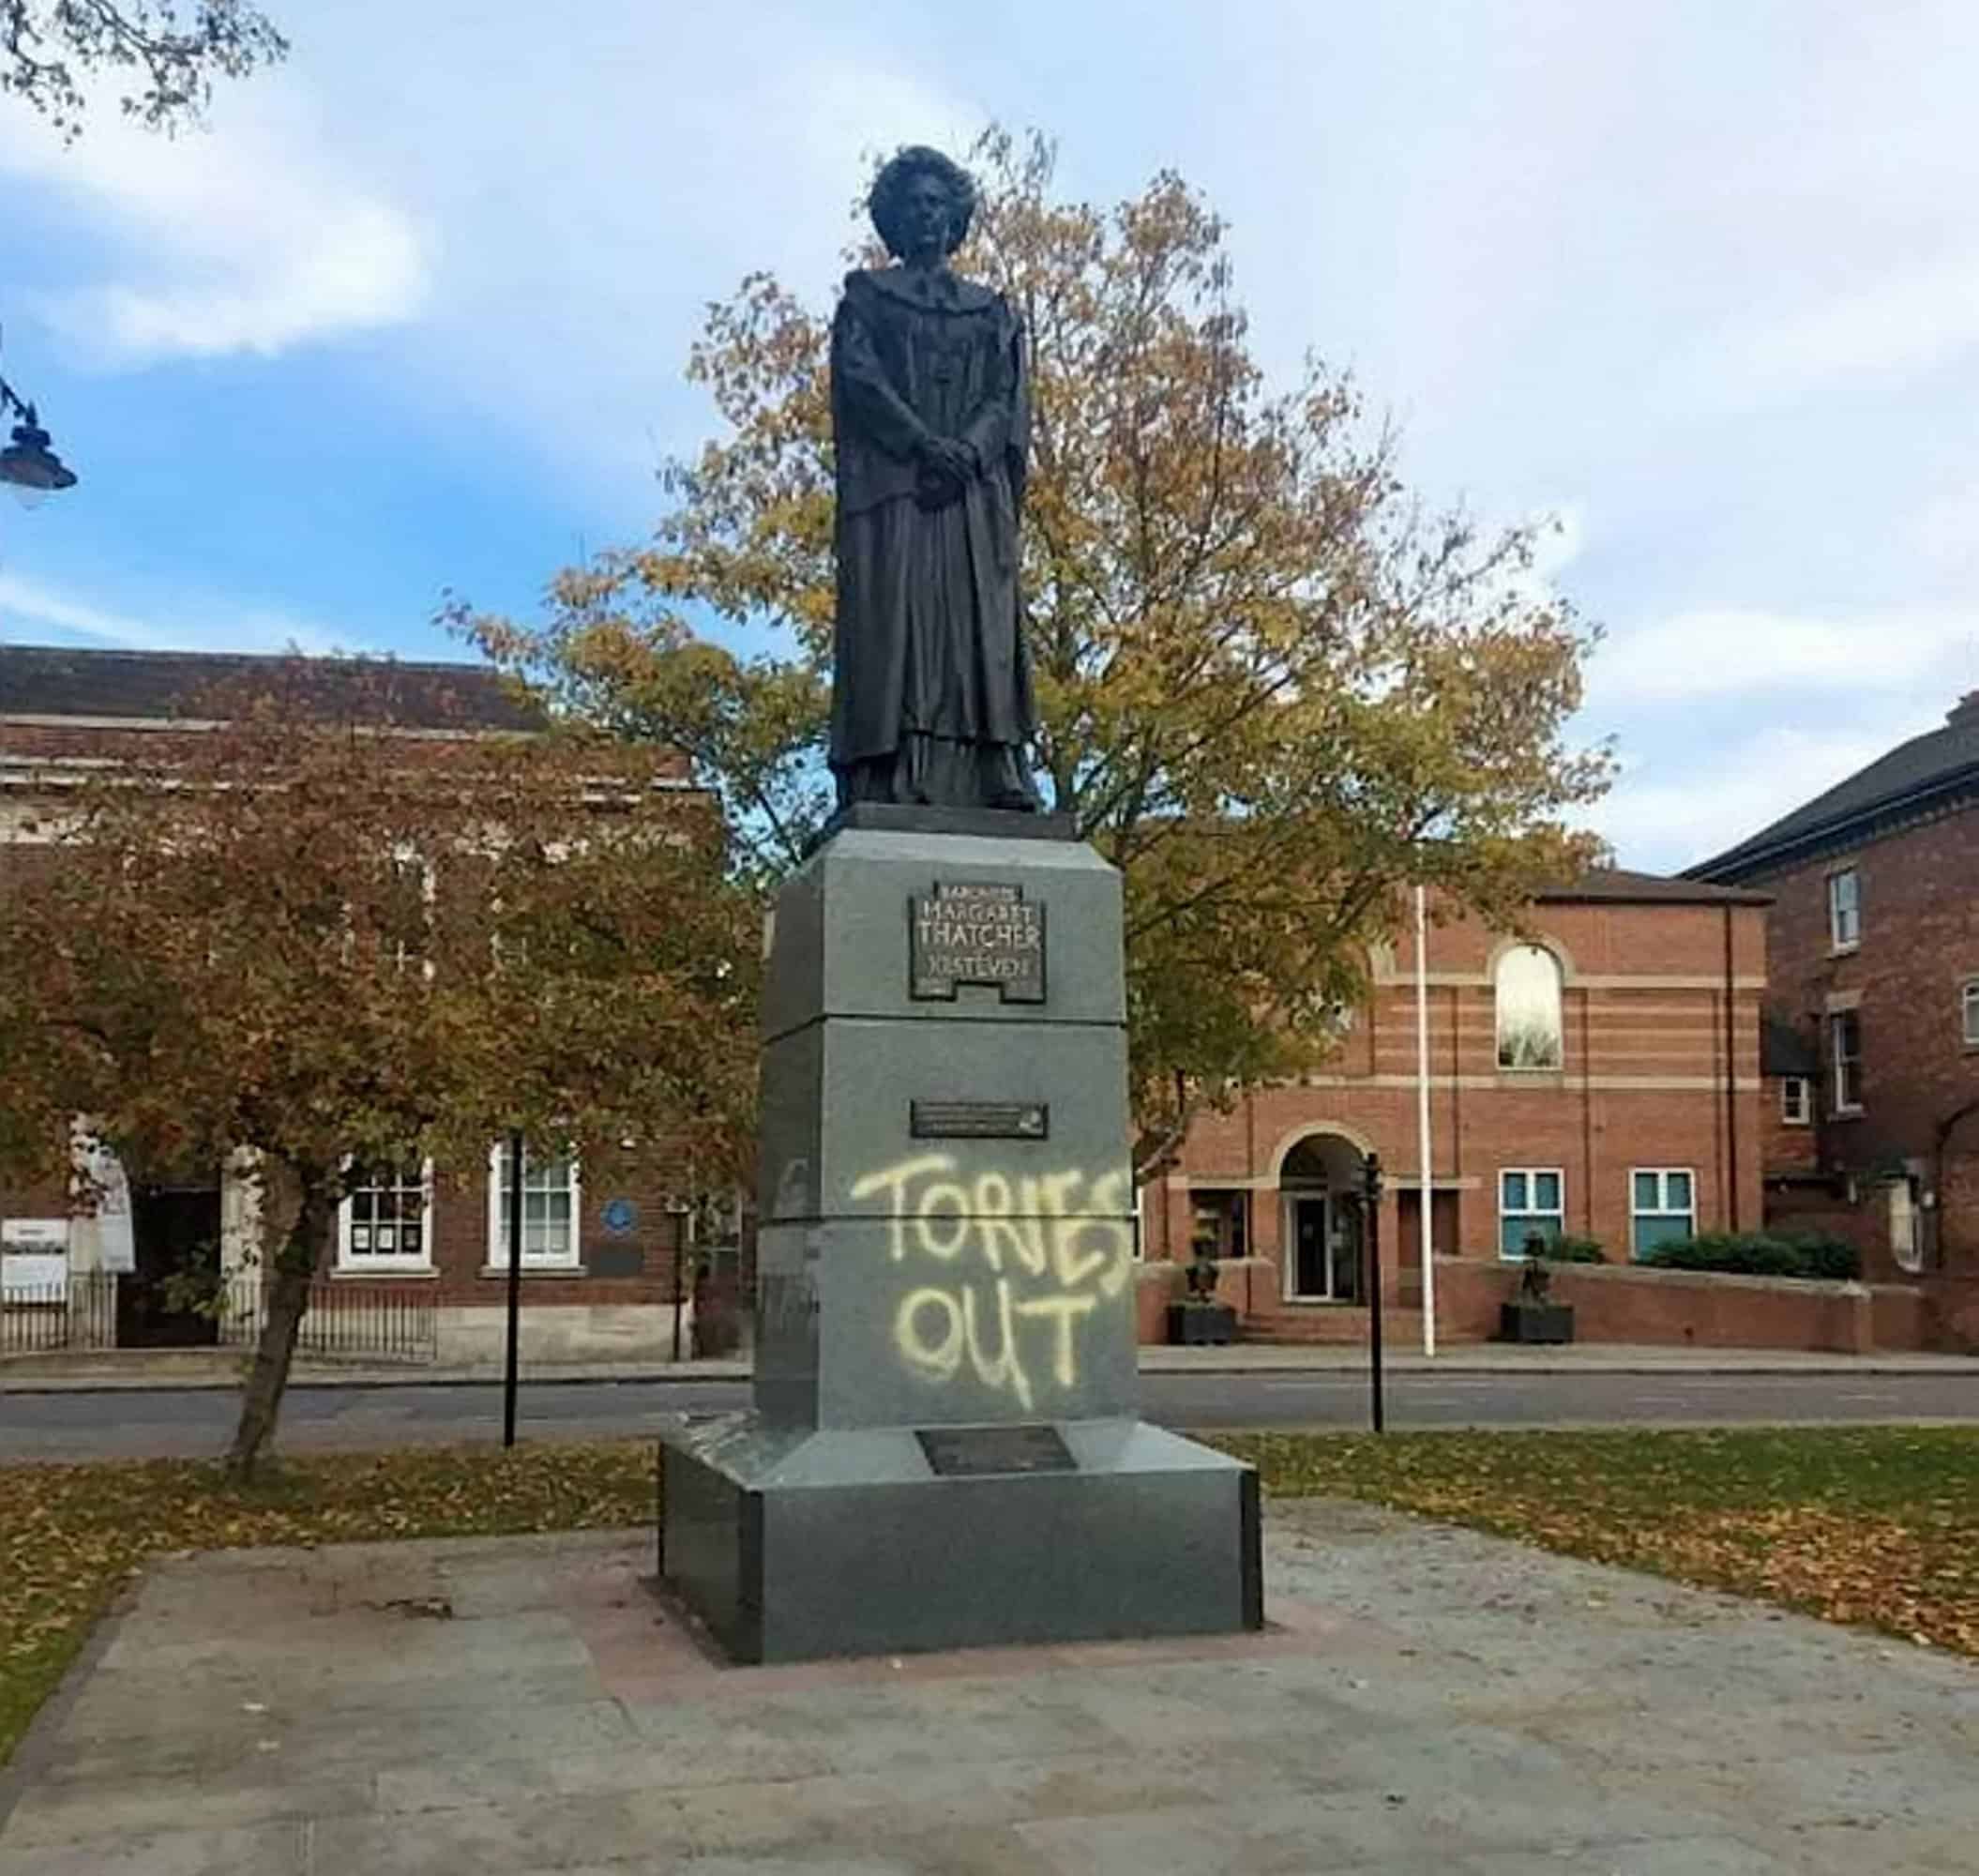 Margaret Thatcher statue vandalised with ‘Tories Out’